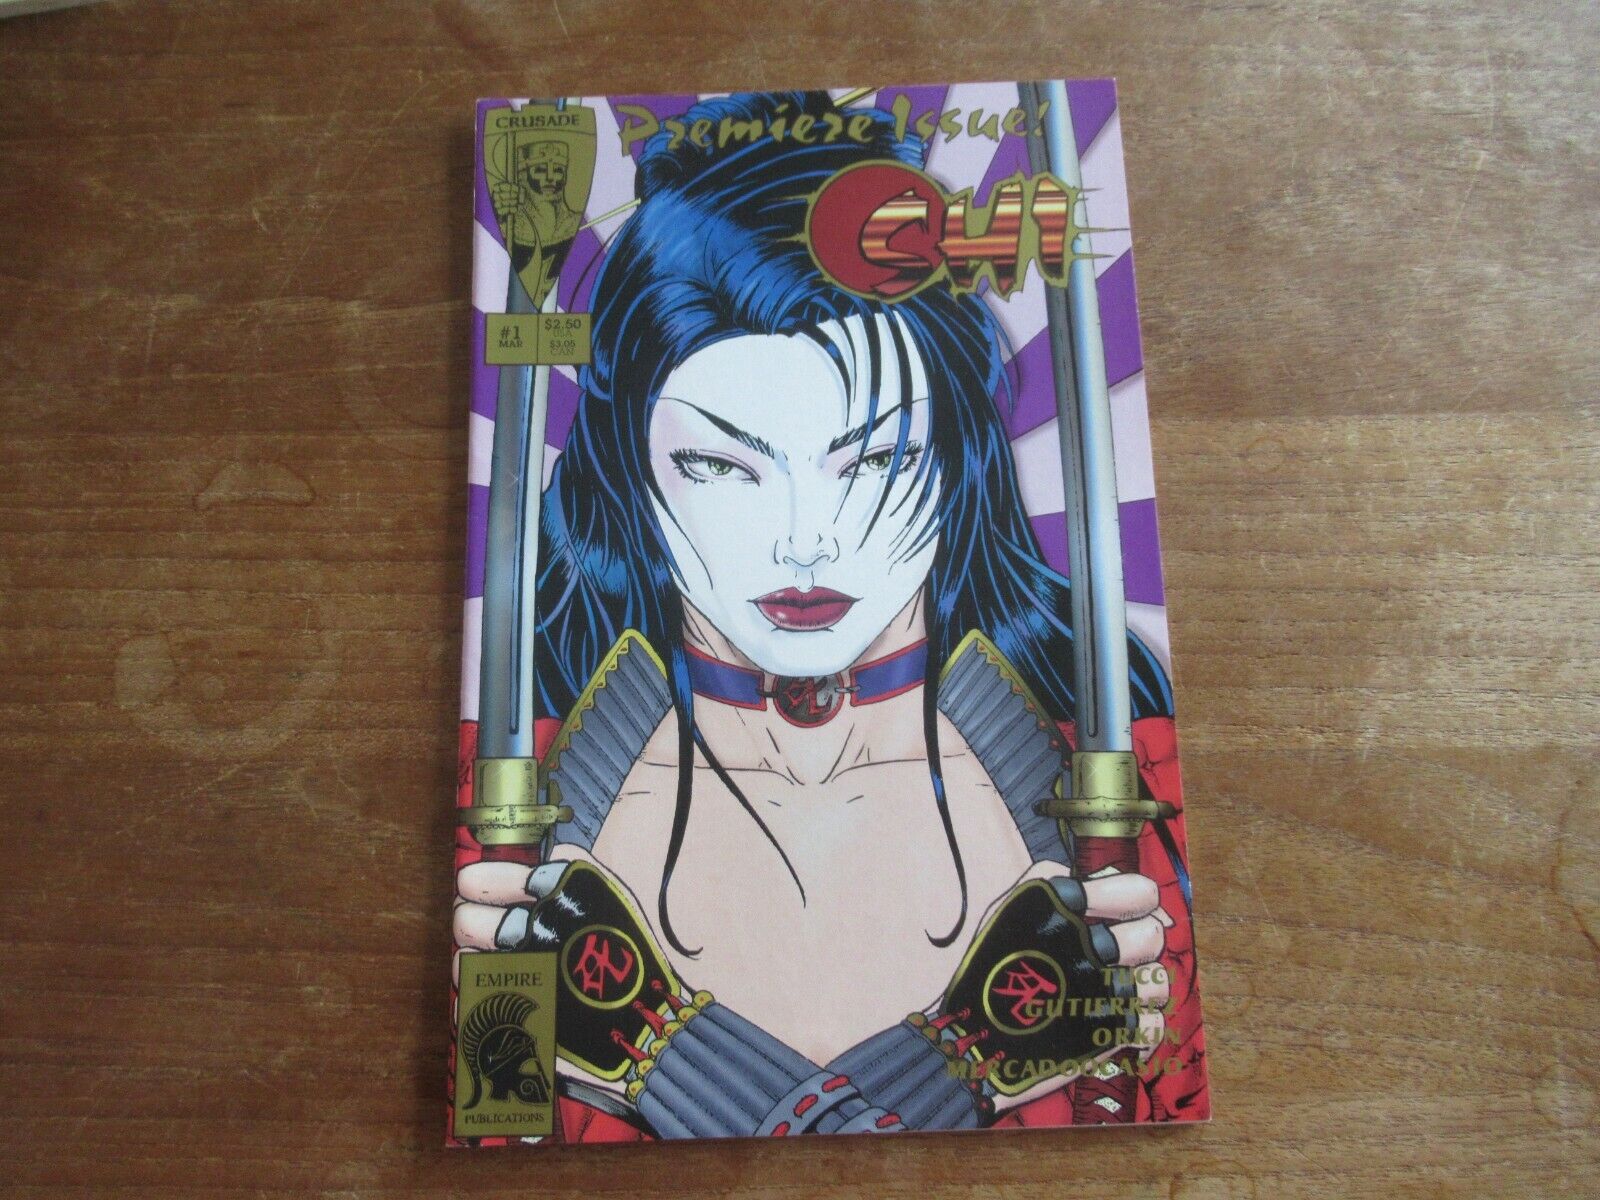 SHI THE WAY OF THE WARRIOR #1 PREMIERE ISSUE HIGH GRADE CRUSADE COMICS